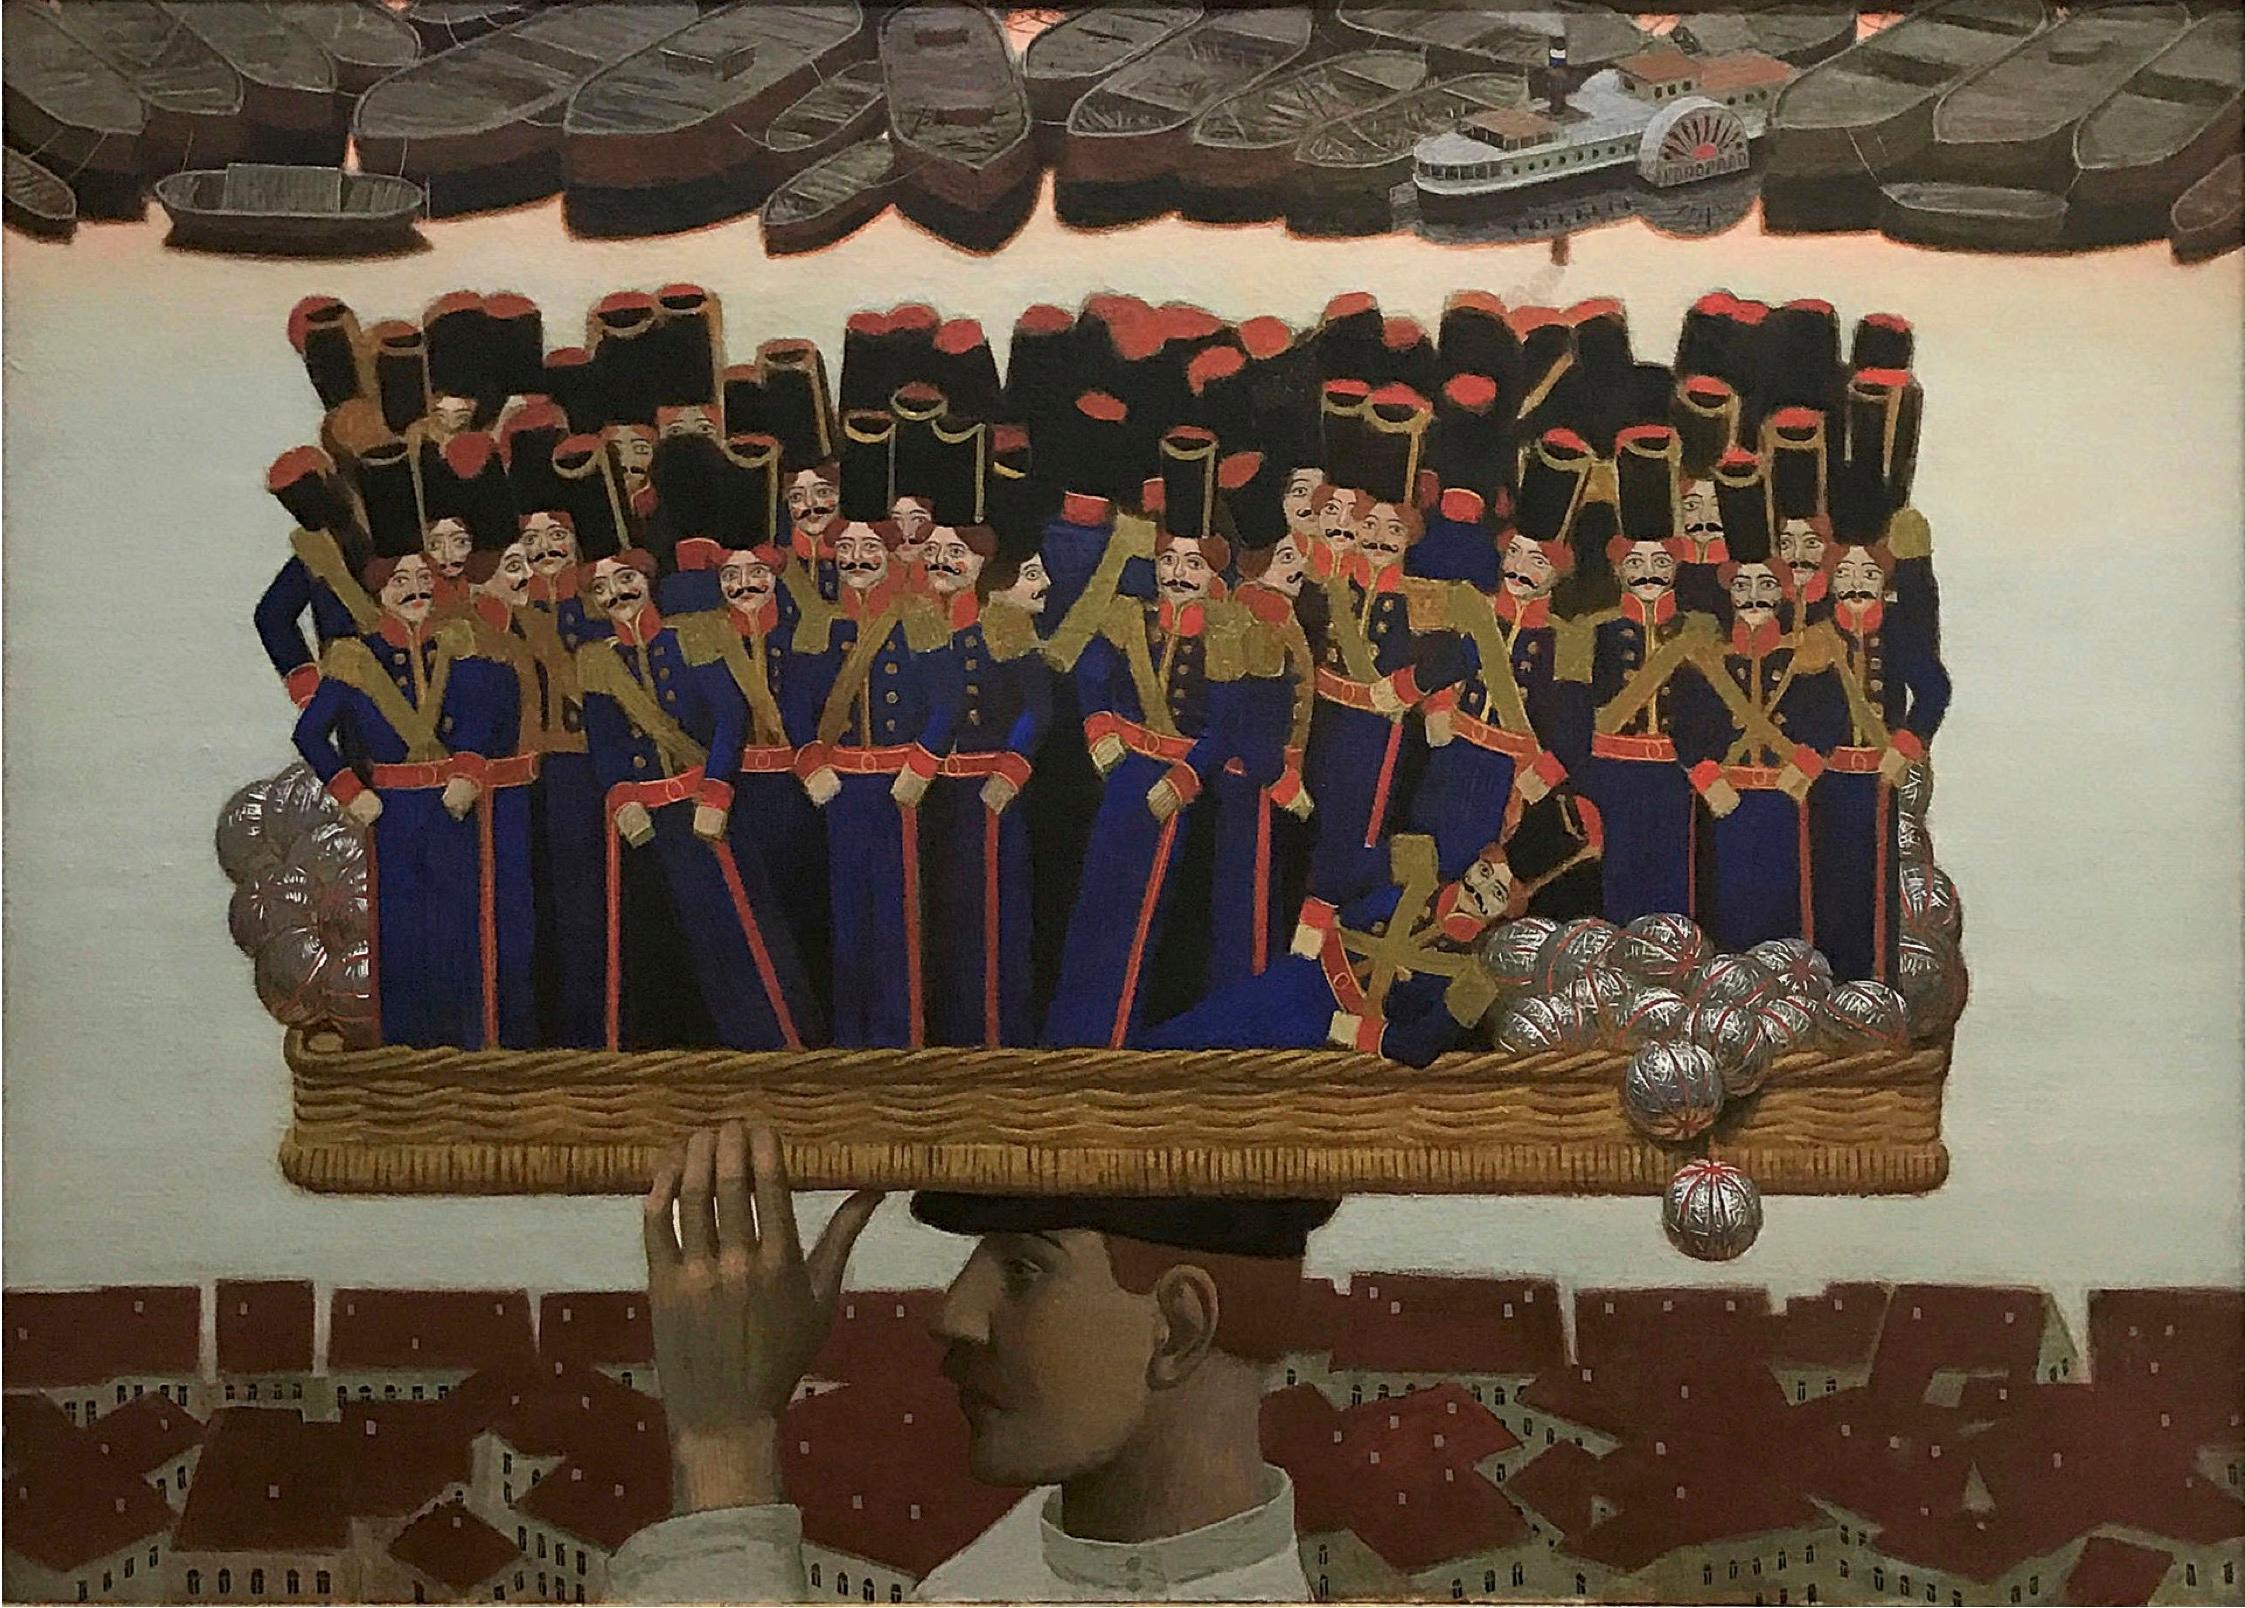 "Toy Seller" Oil Painting 35" x 45" inch by Andrey Remnev

ARTIST BIO:
"My birth place is Yakhroma town, in the vicinity of Moscow. It is situated on high hills, from where broad Bruegelian vistas are open. The uneven terrain with significant